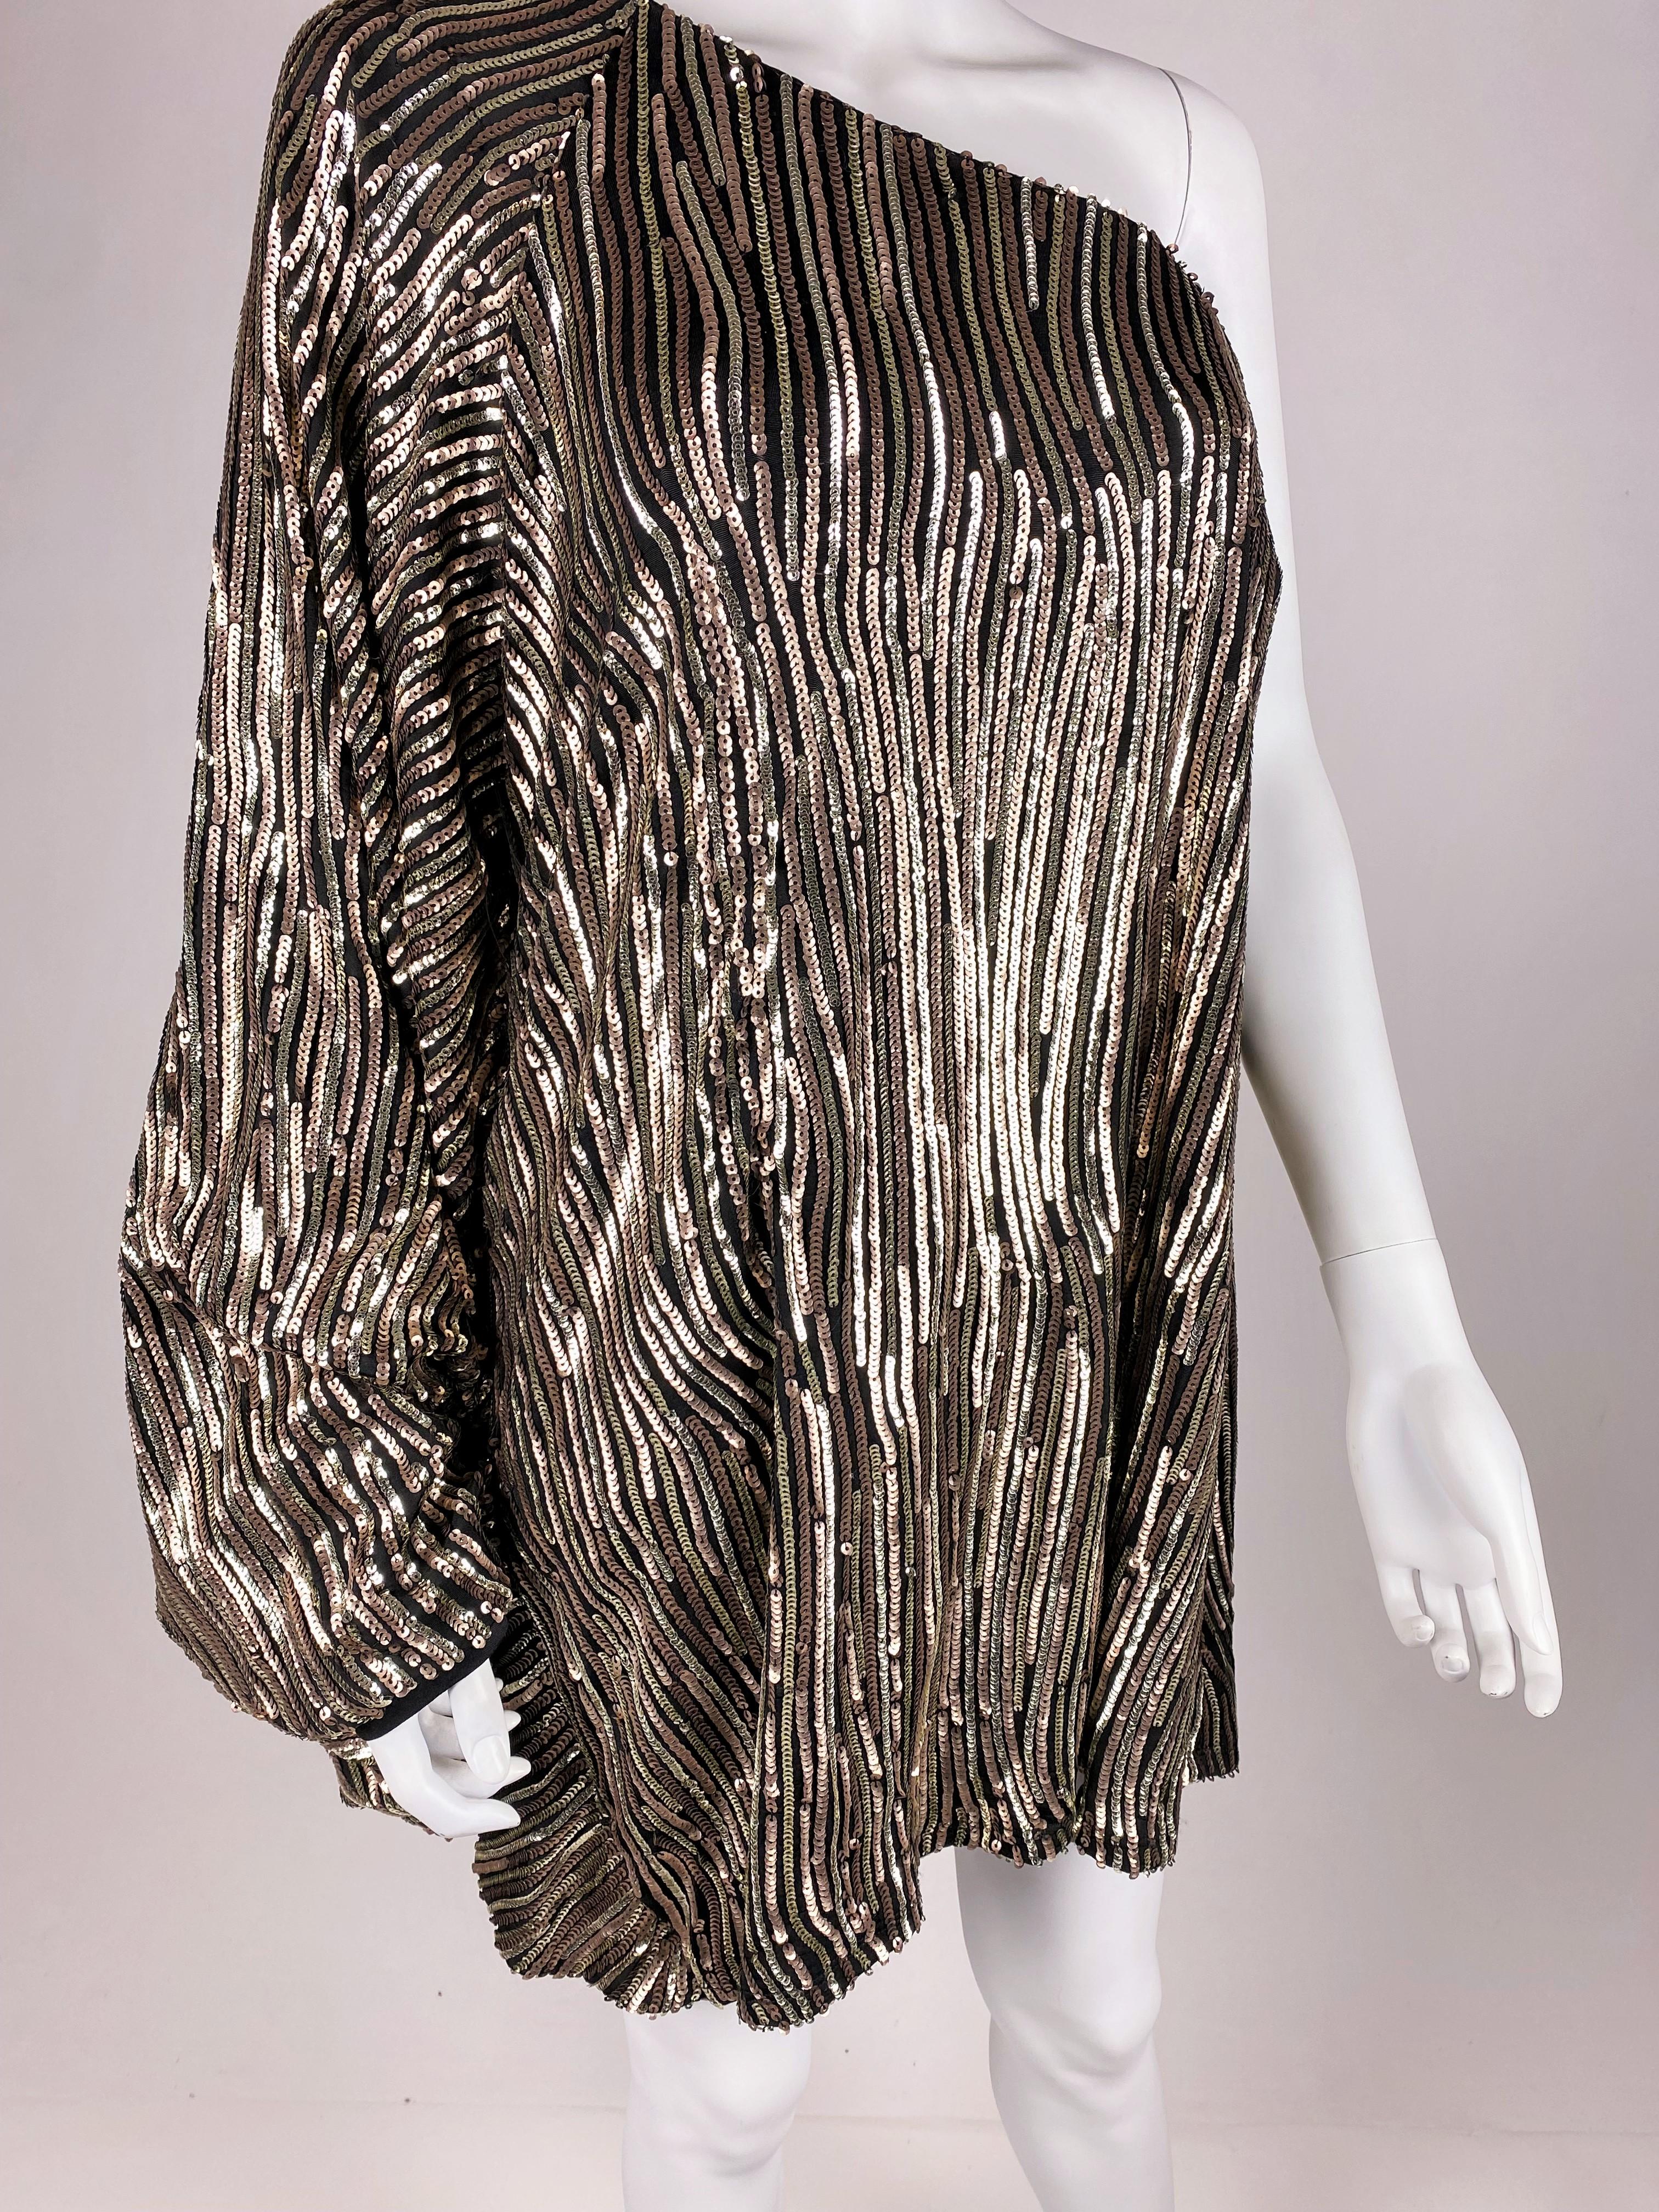 A Sequin top or mini-dress with bat handle For a Party - France Circa 1980 For Sale 4